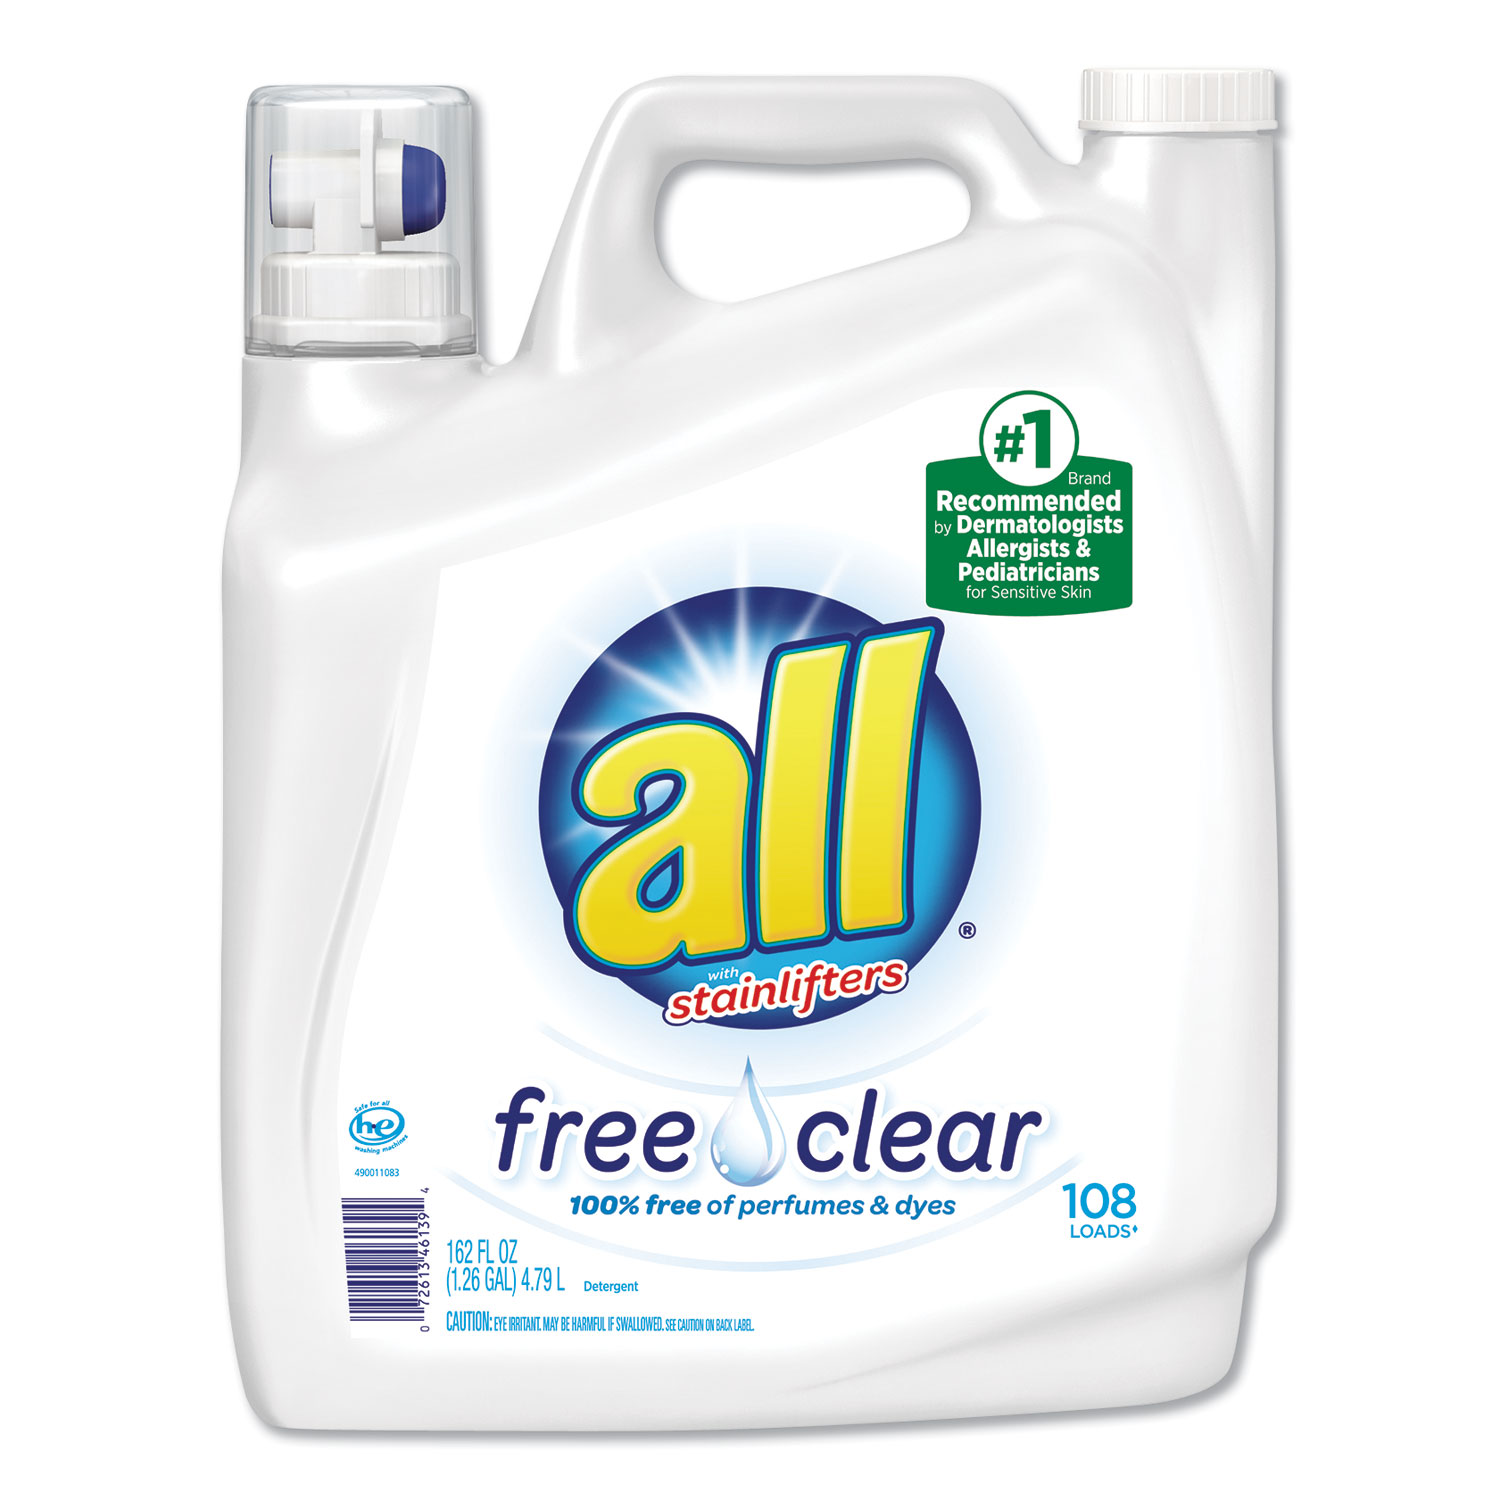 All® Liquid Laundry Detergent Free Clear for Sensitive Skin, 162 oz Bottle